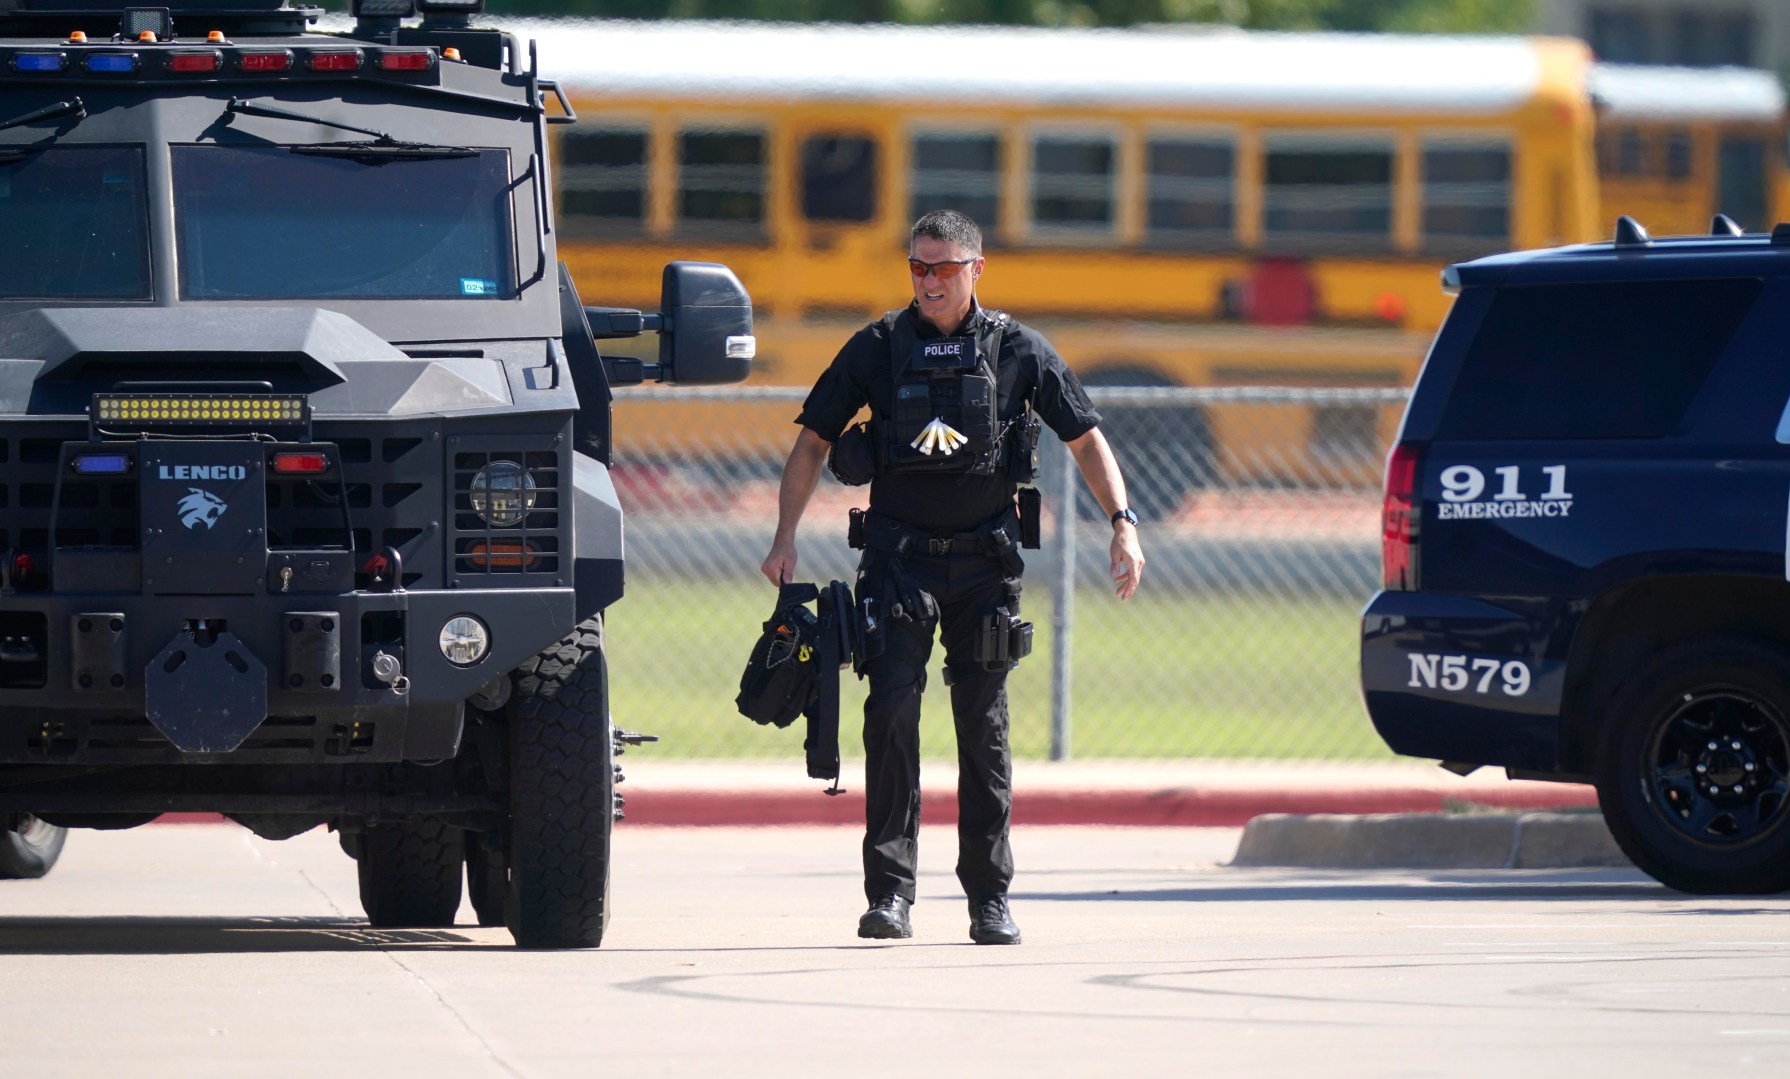 Four people were hurt in a high school shooting.